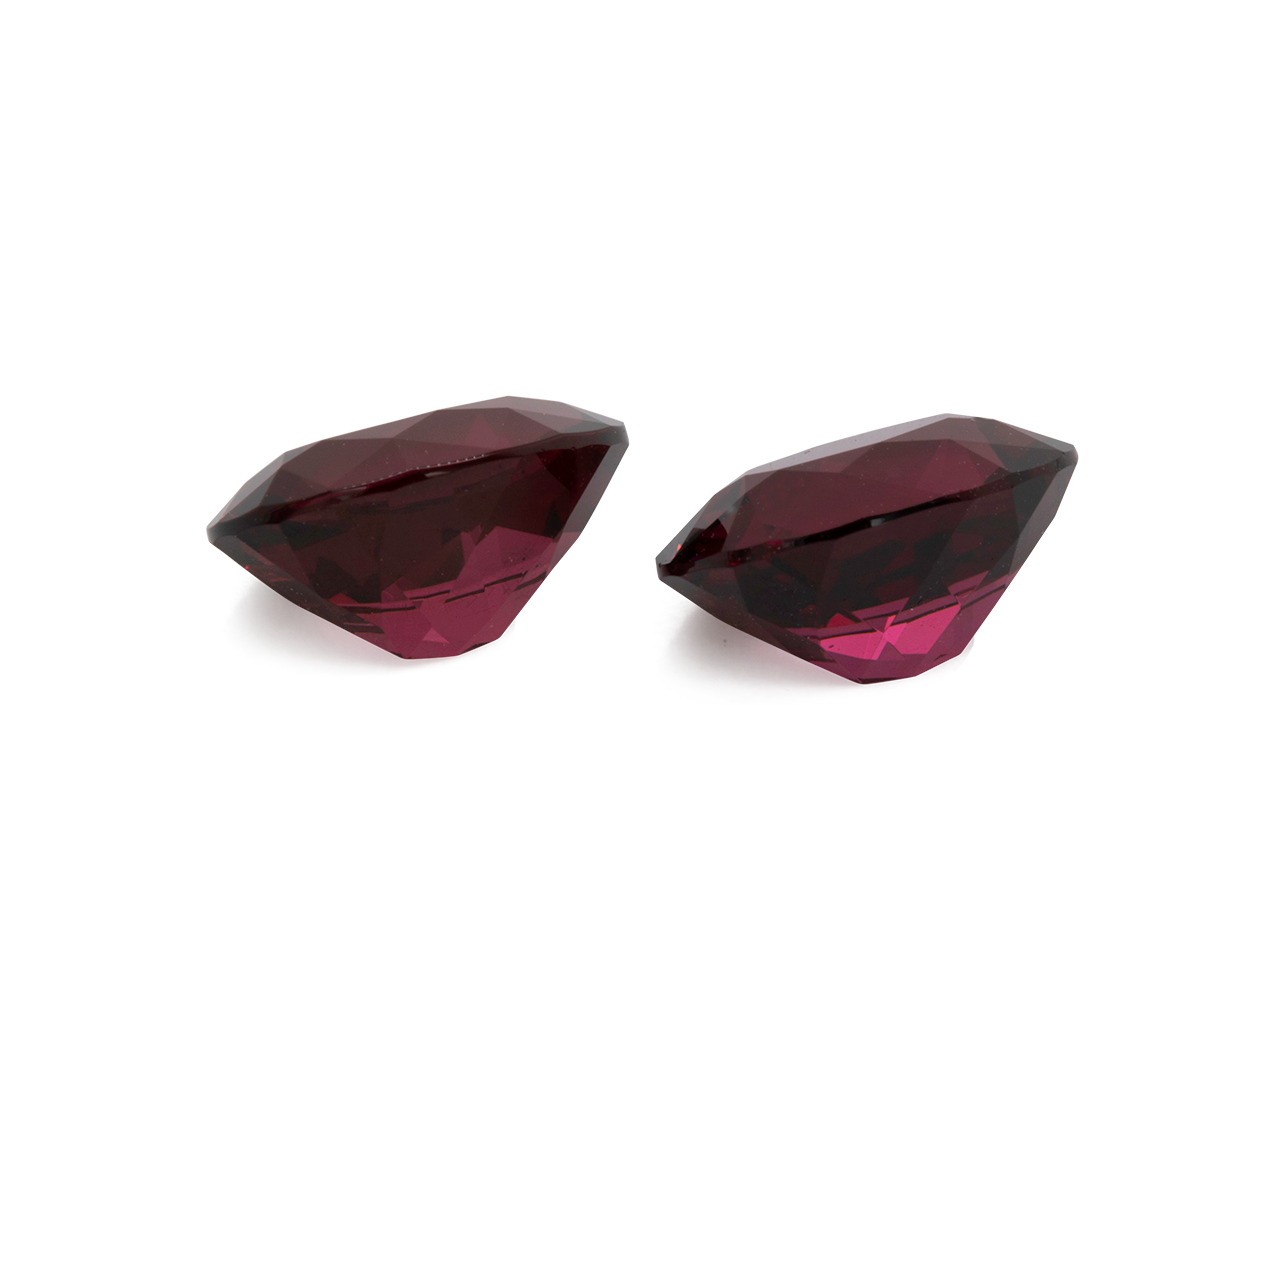 Rhodolite Pair - red, oval, 9x7 mm, 4.62 cts, No. RD92001